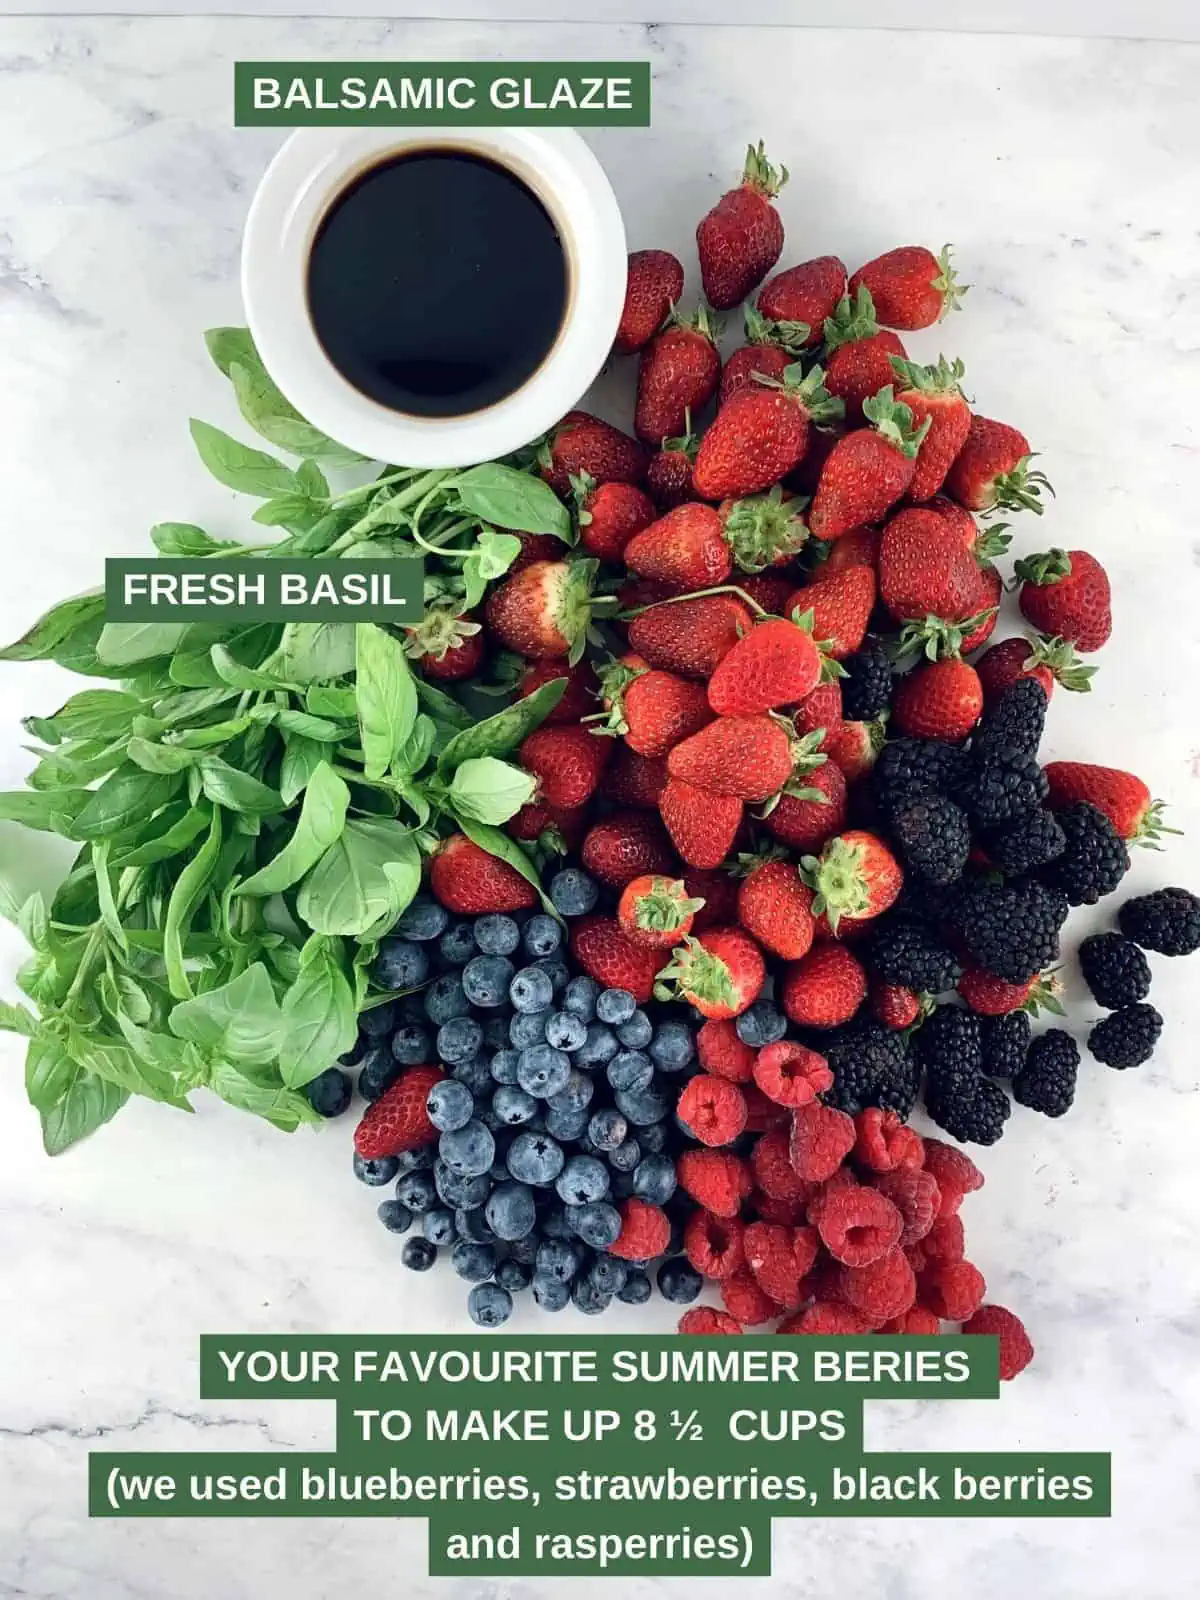 Labelled ingredients needed to make a summer berry salad.